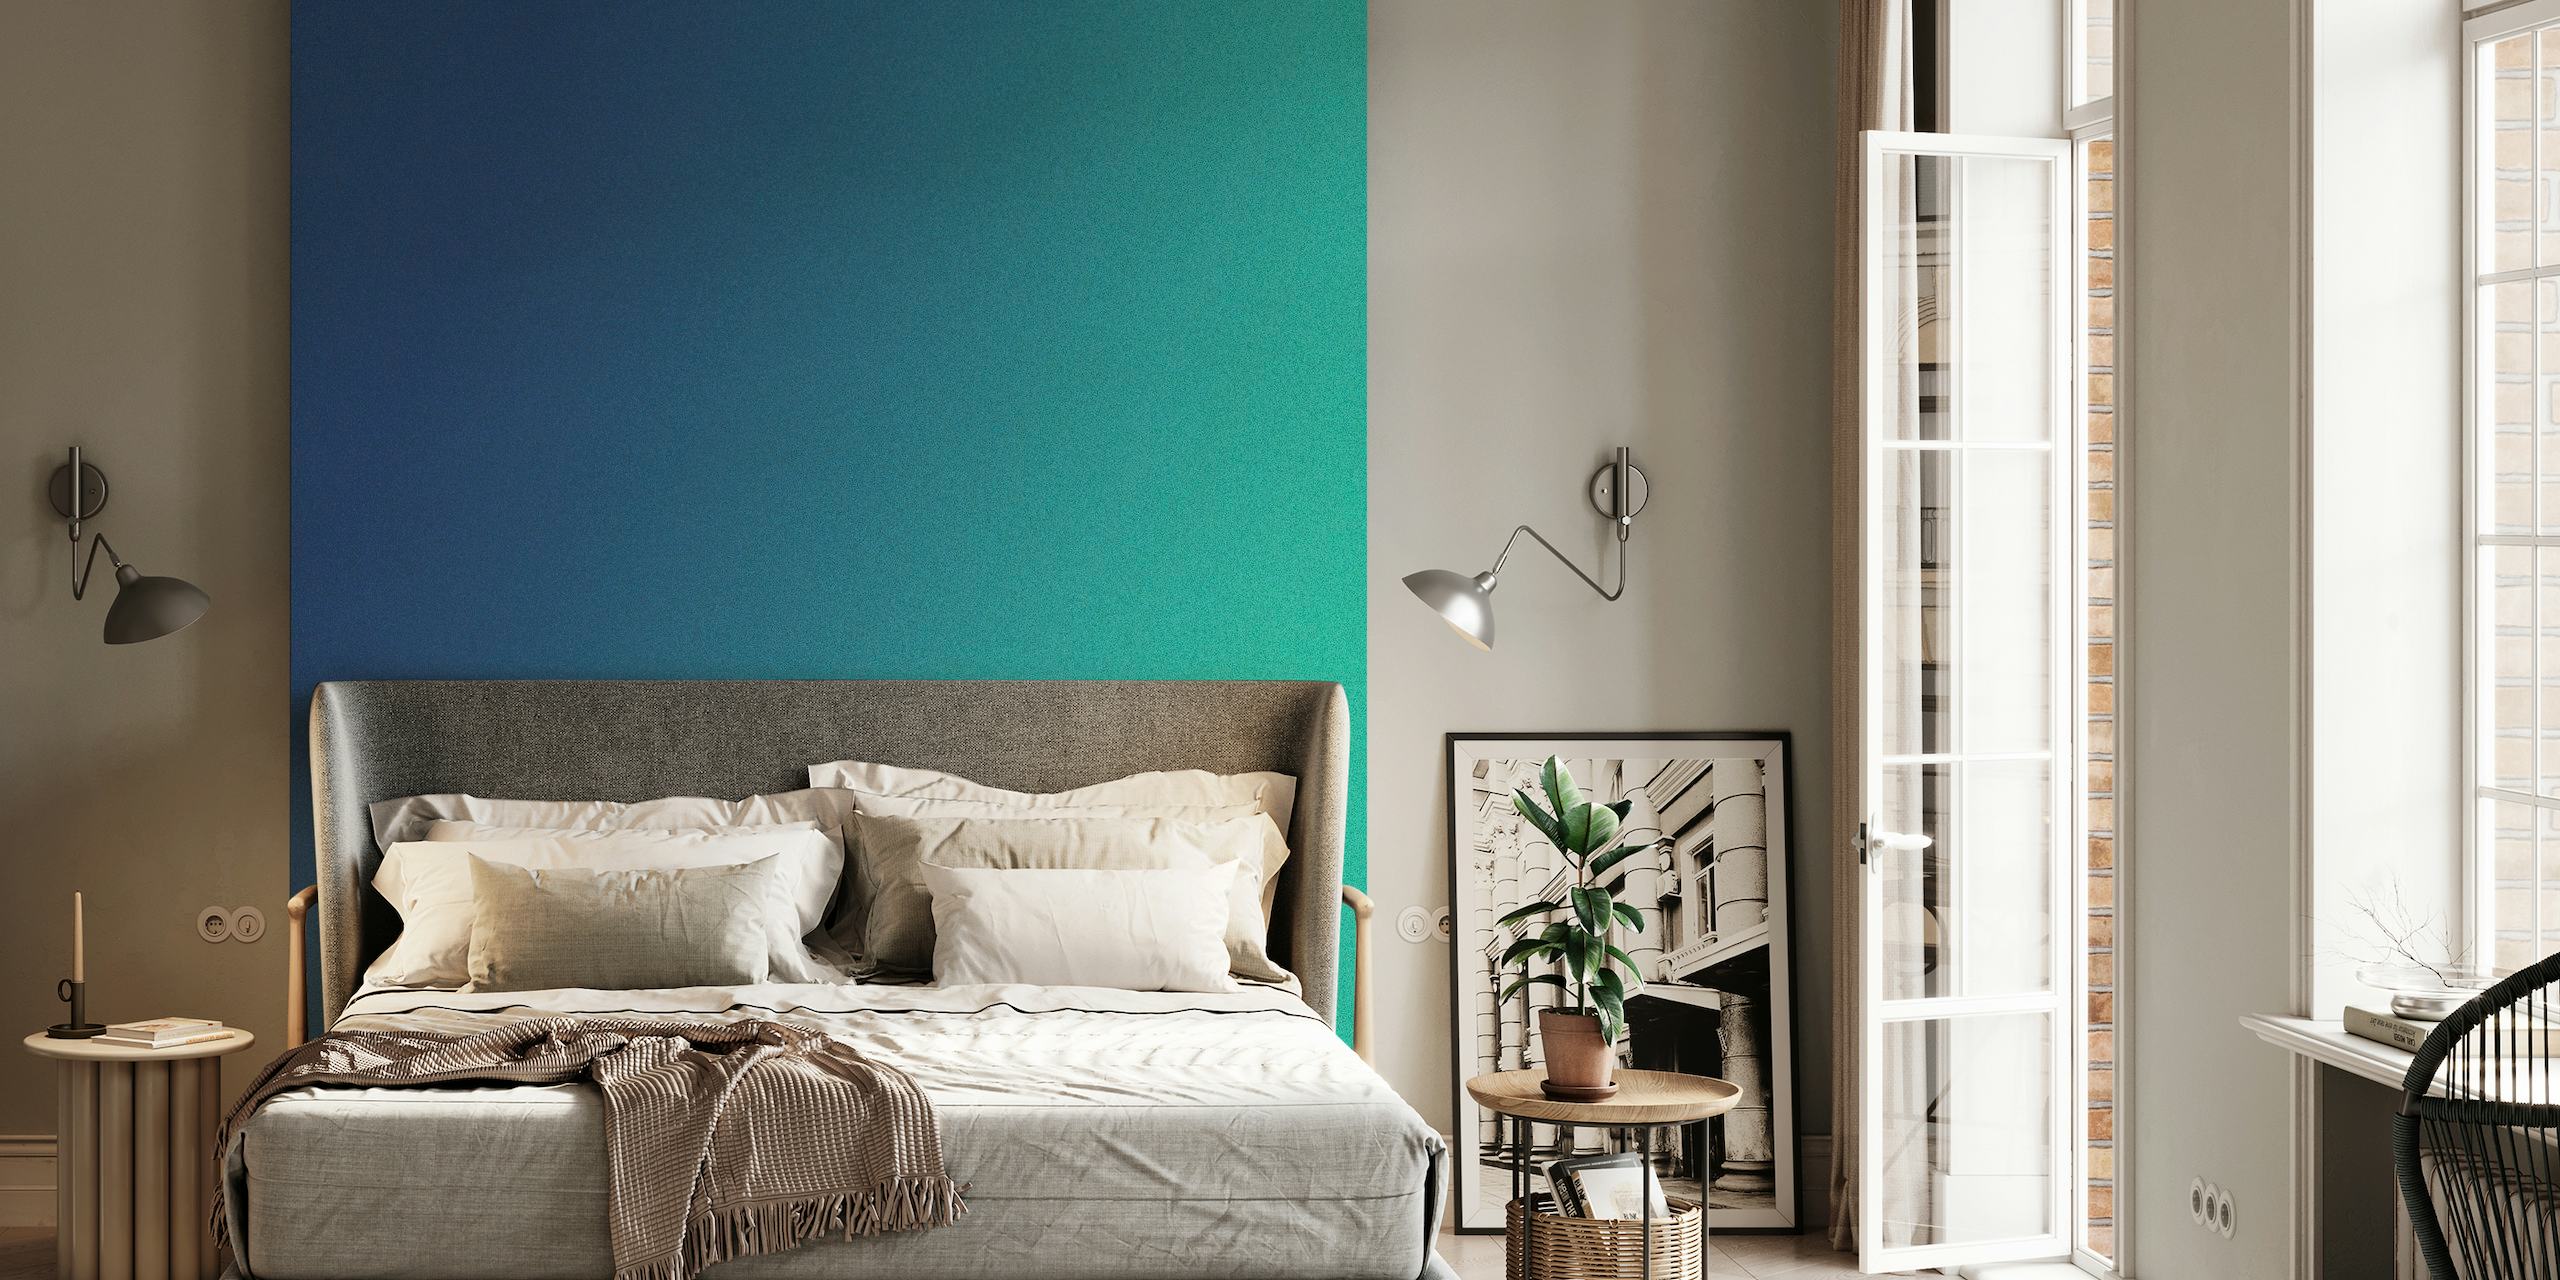 Soft Serenity gradient wall mural with teal to sky blue transition